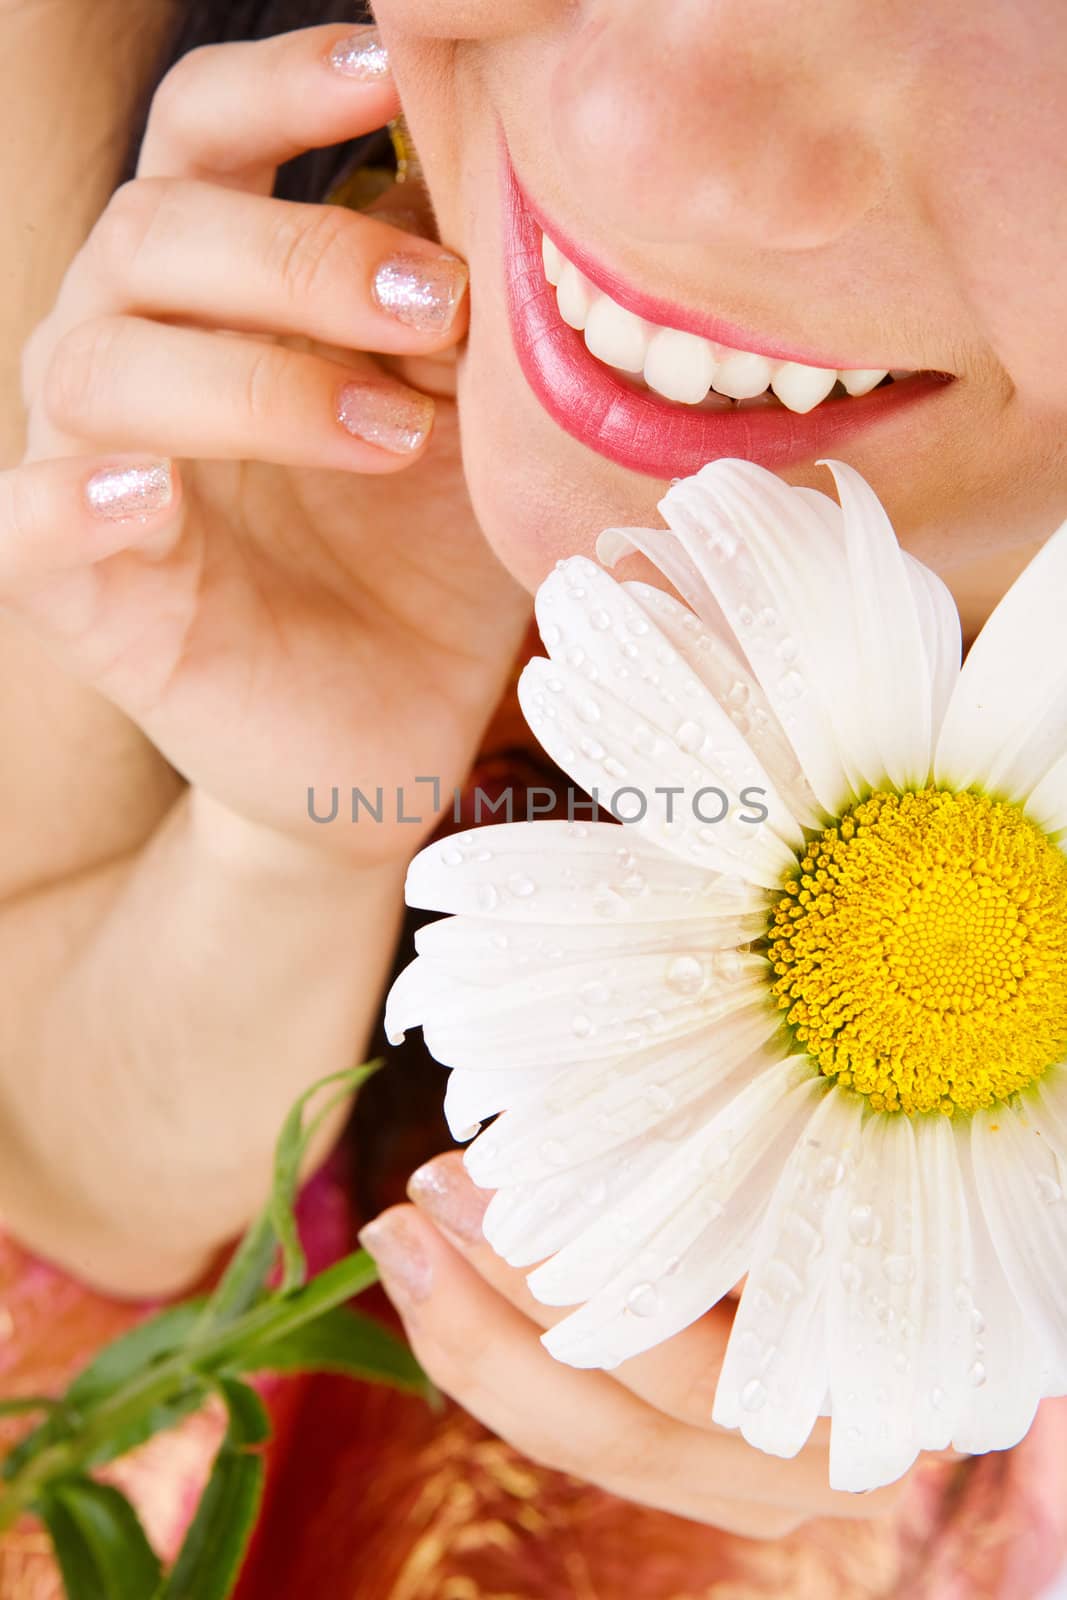 smiling lips of girl and camomile flower